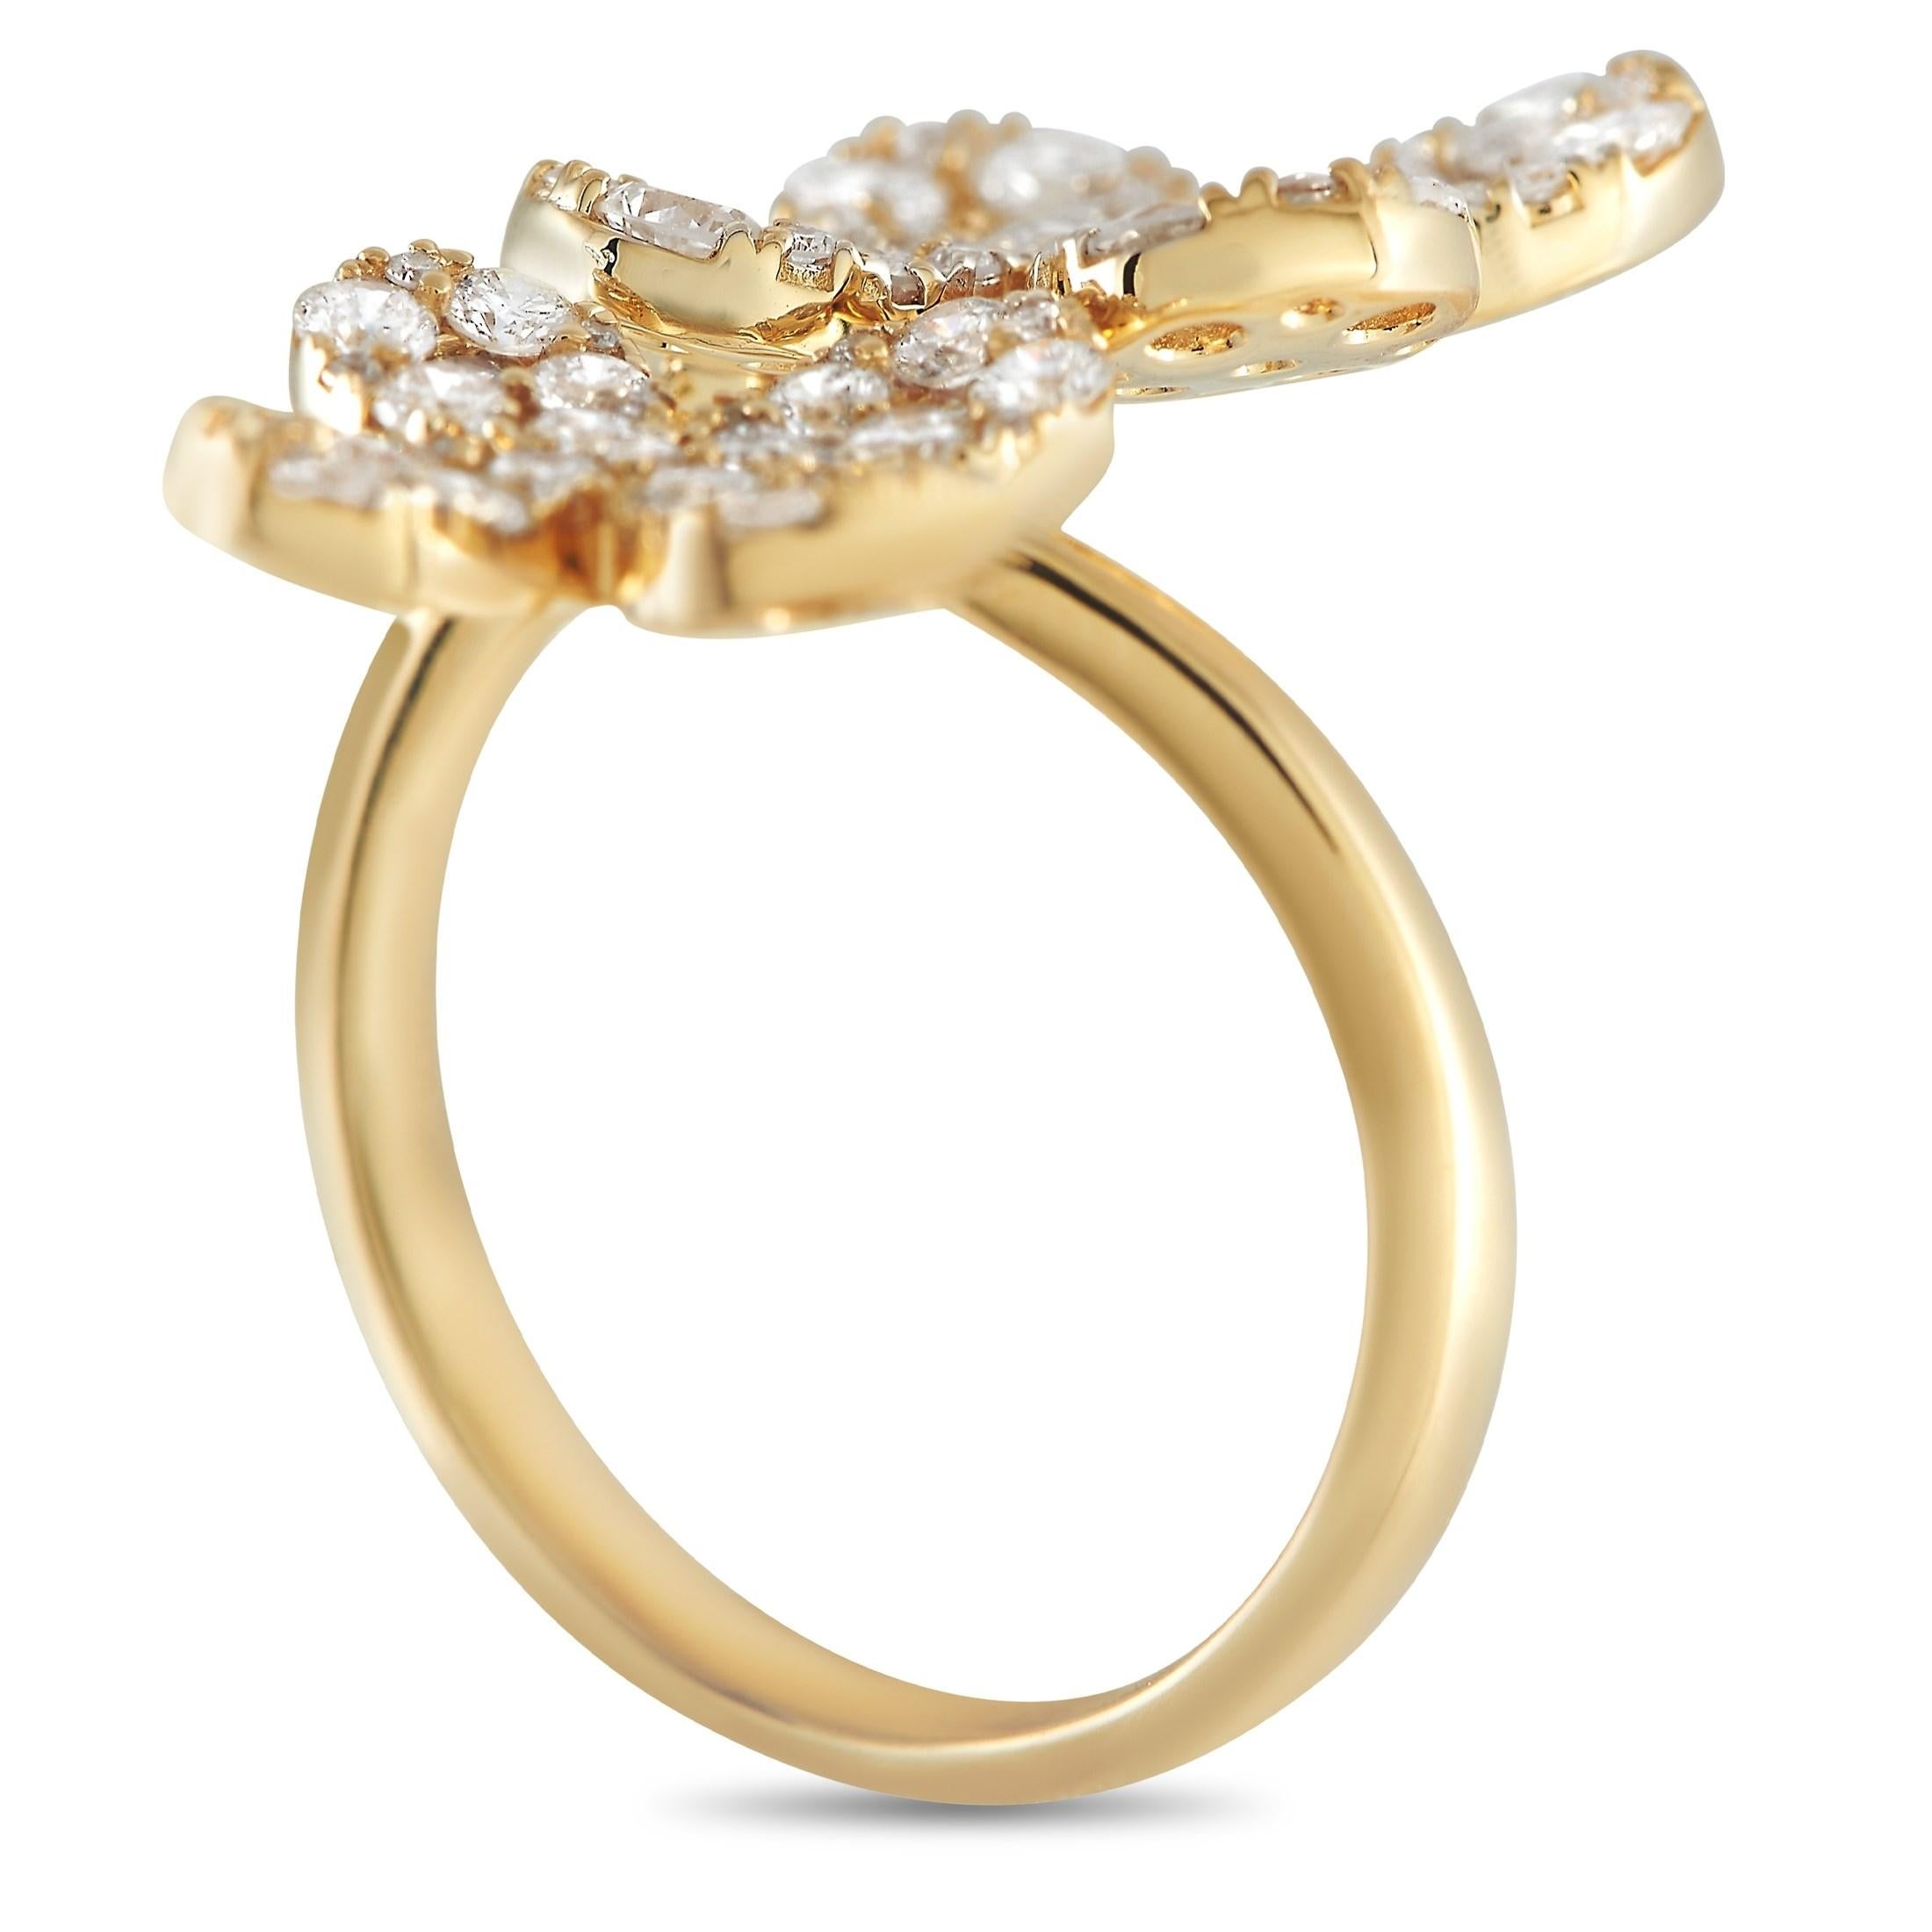 This unique LB Exclusive 18K Yellow Gold 1.65 ct Diamond Open Wrap Ring is made with 18K yellow gold that wraps around the winger and meets in the front with two unique shapes, each set with round diamonds totaling 1.65 carats of diamonds. The ring